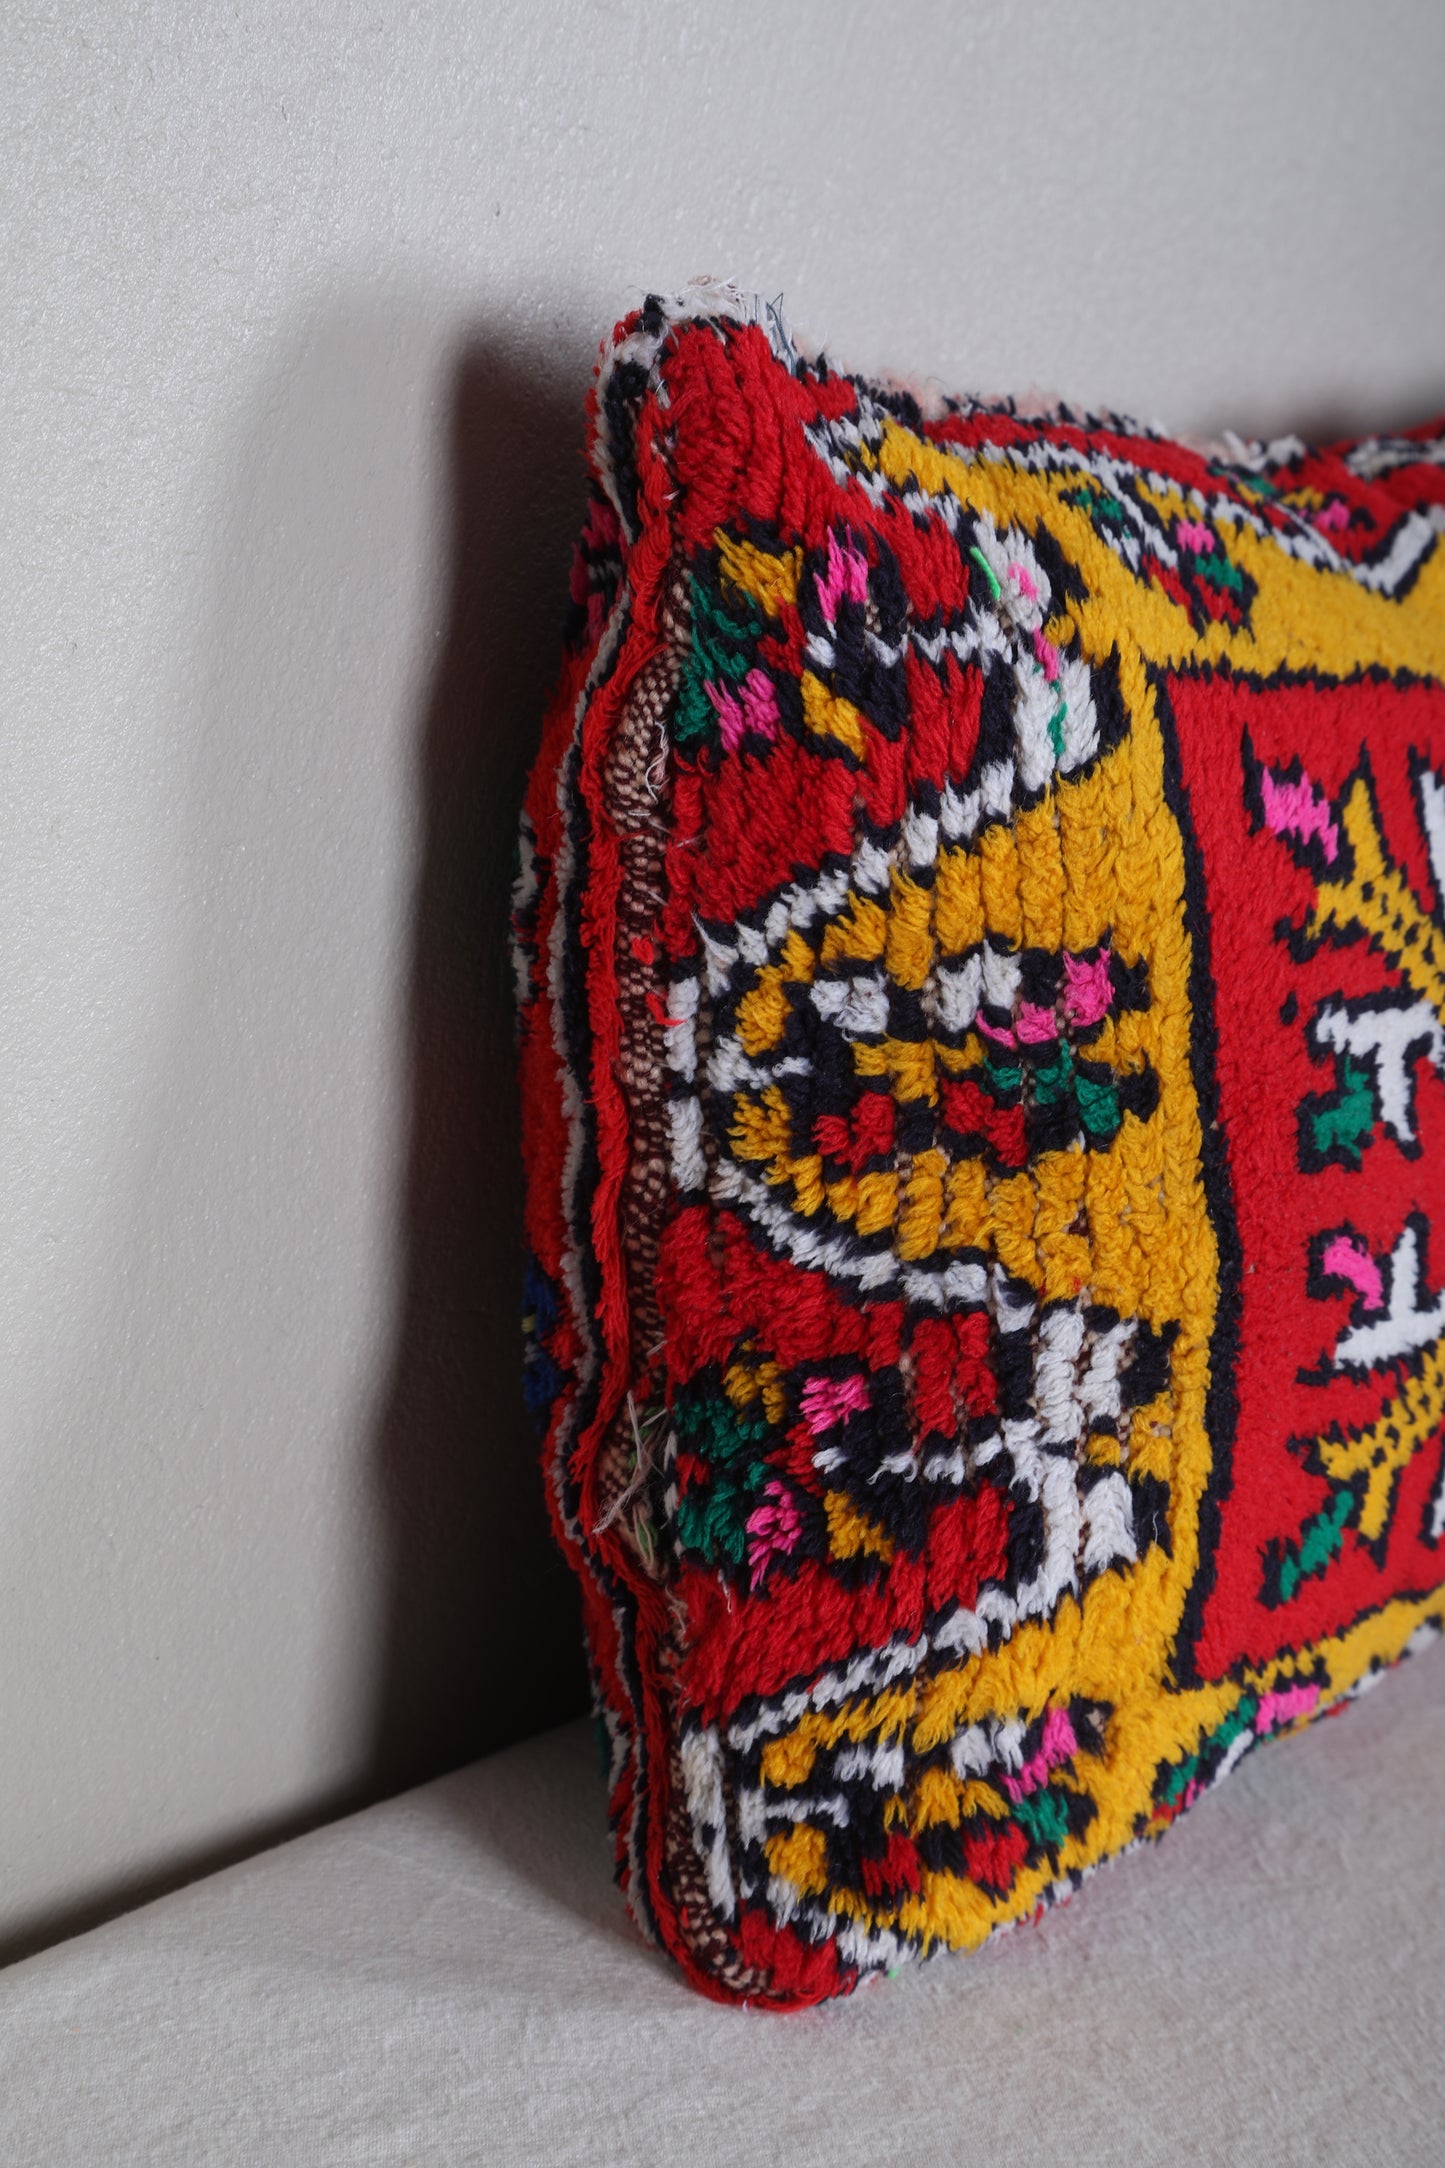 Vintage Berber kilim pillow 11.4 INCHES X 20.8 INCHES